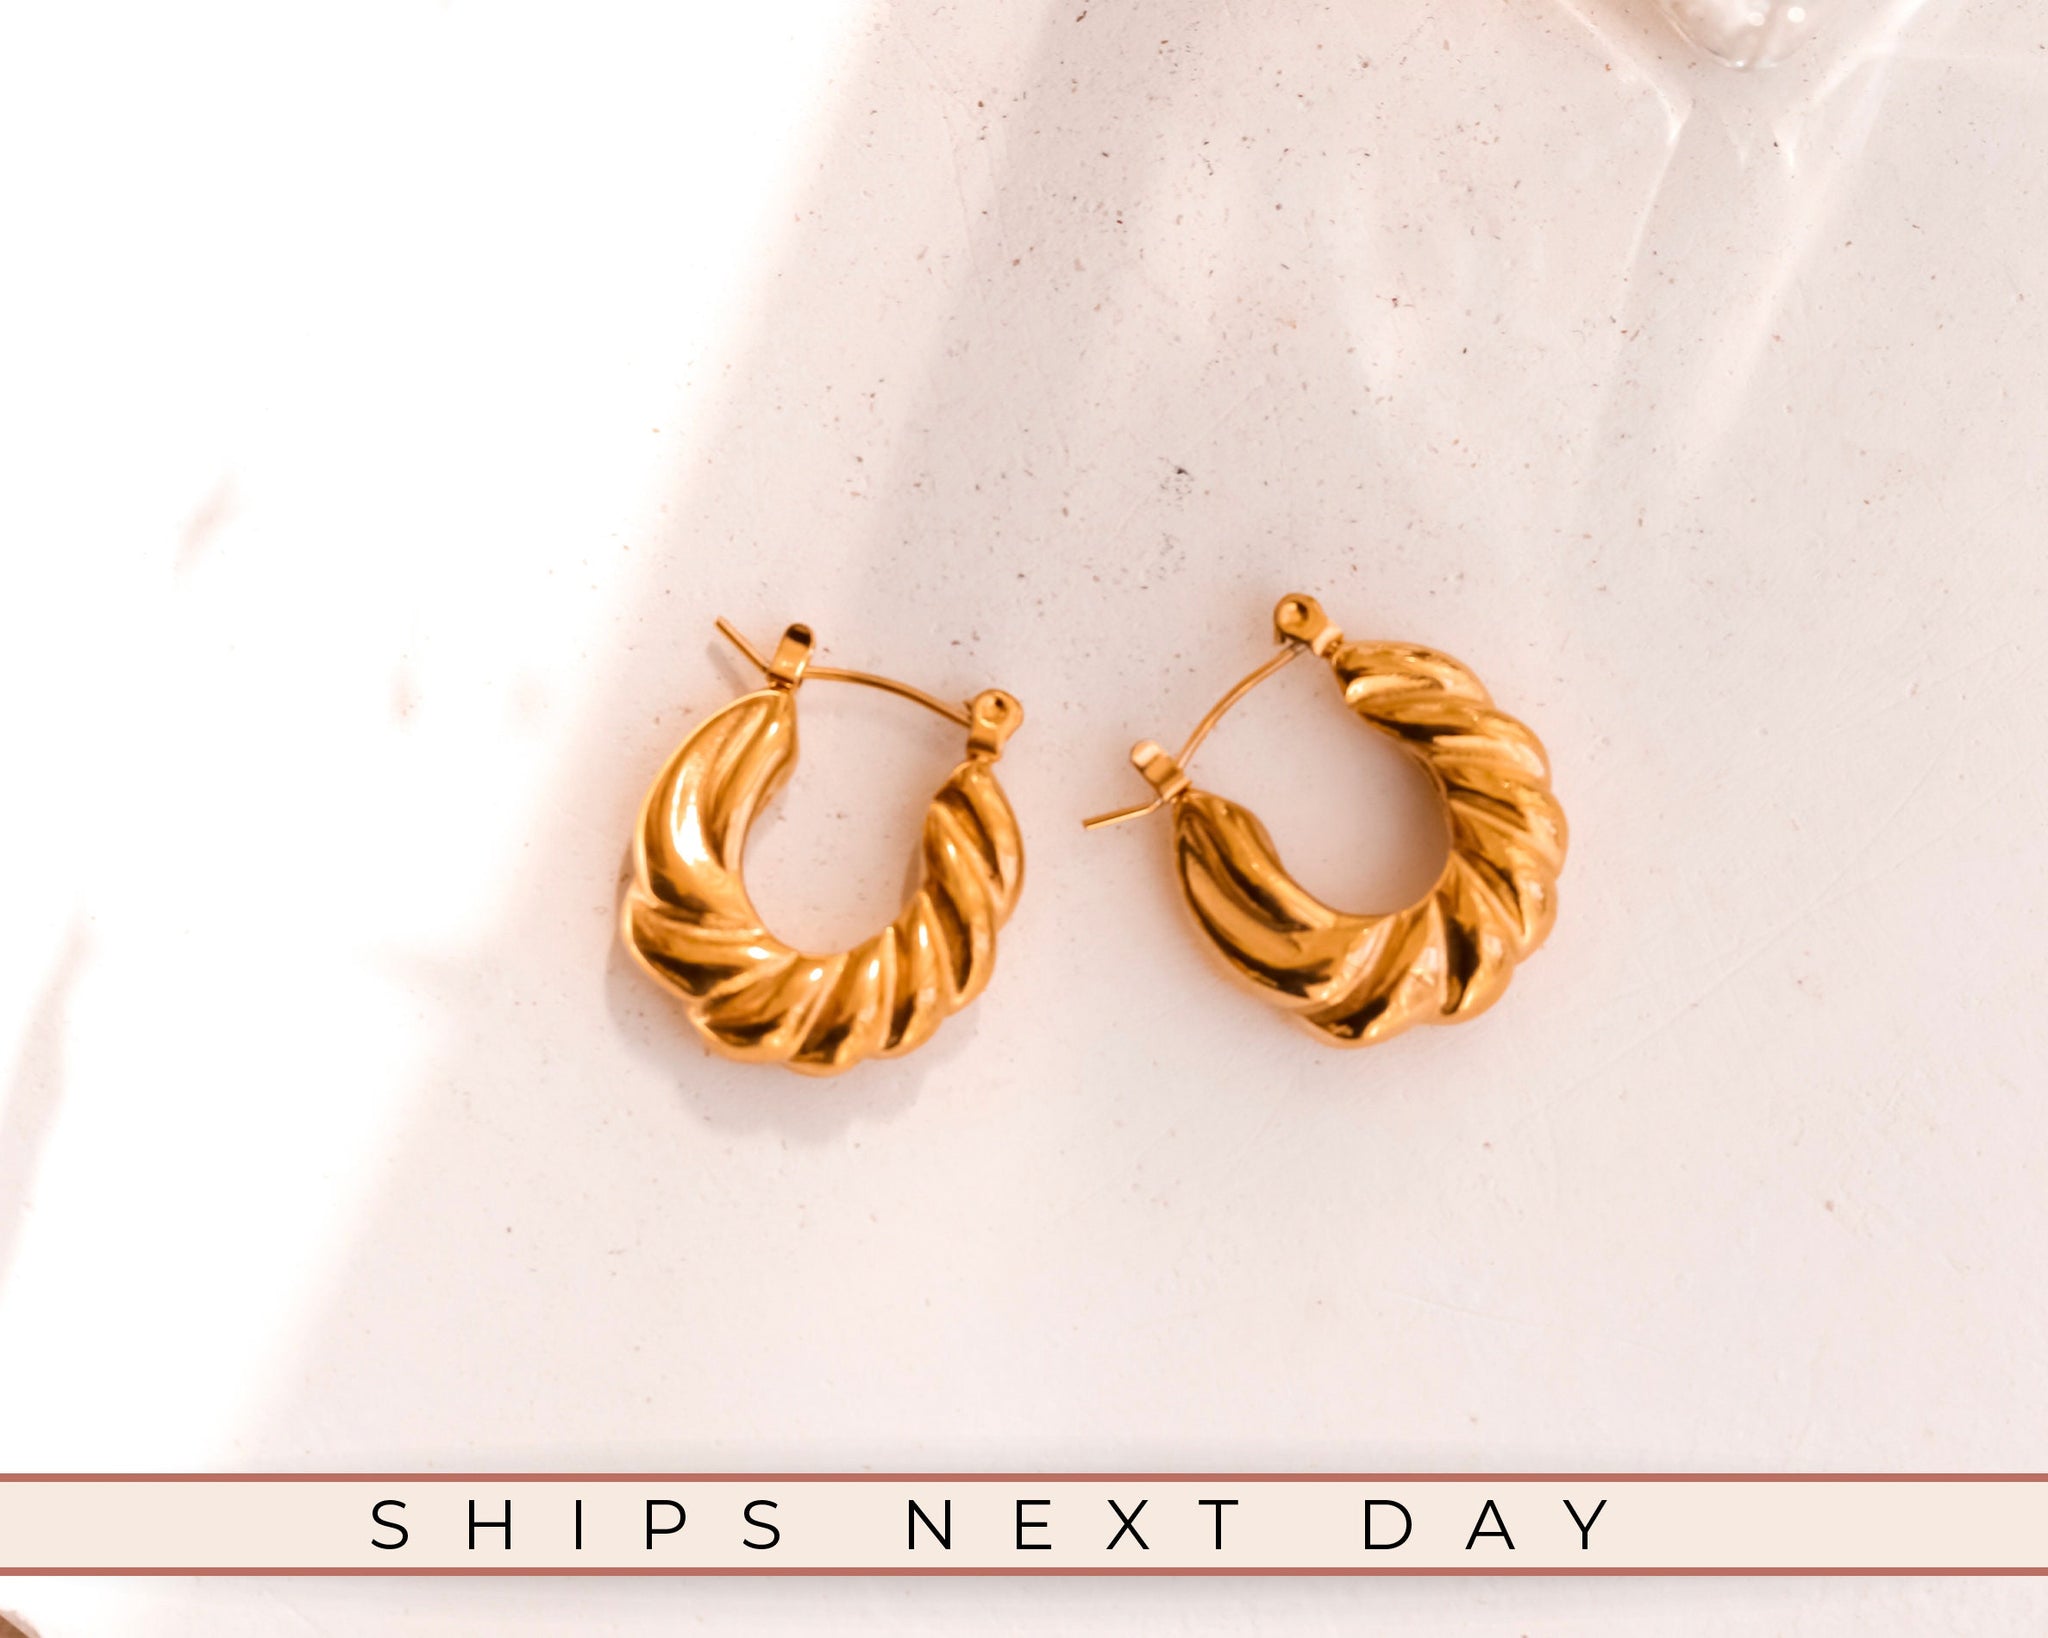 Spiral Hoop Earrings, 18K Gold, Mom To Be Gift, Croissant Hoop Earrings, Minimalist Twist Earrings, Gift For Mothers Day, Unique Jewelry